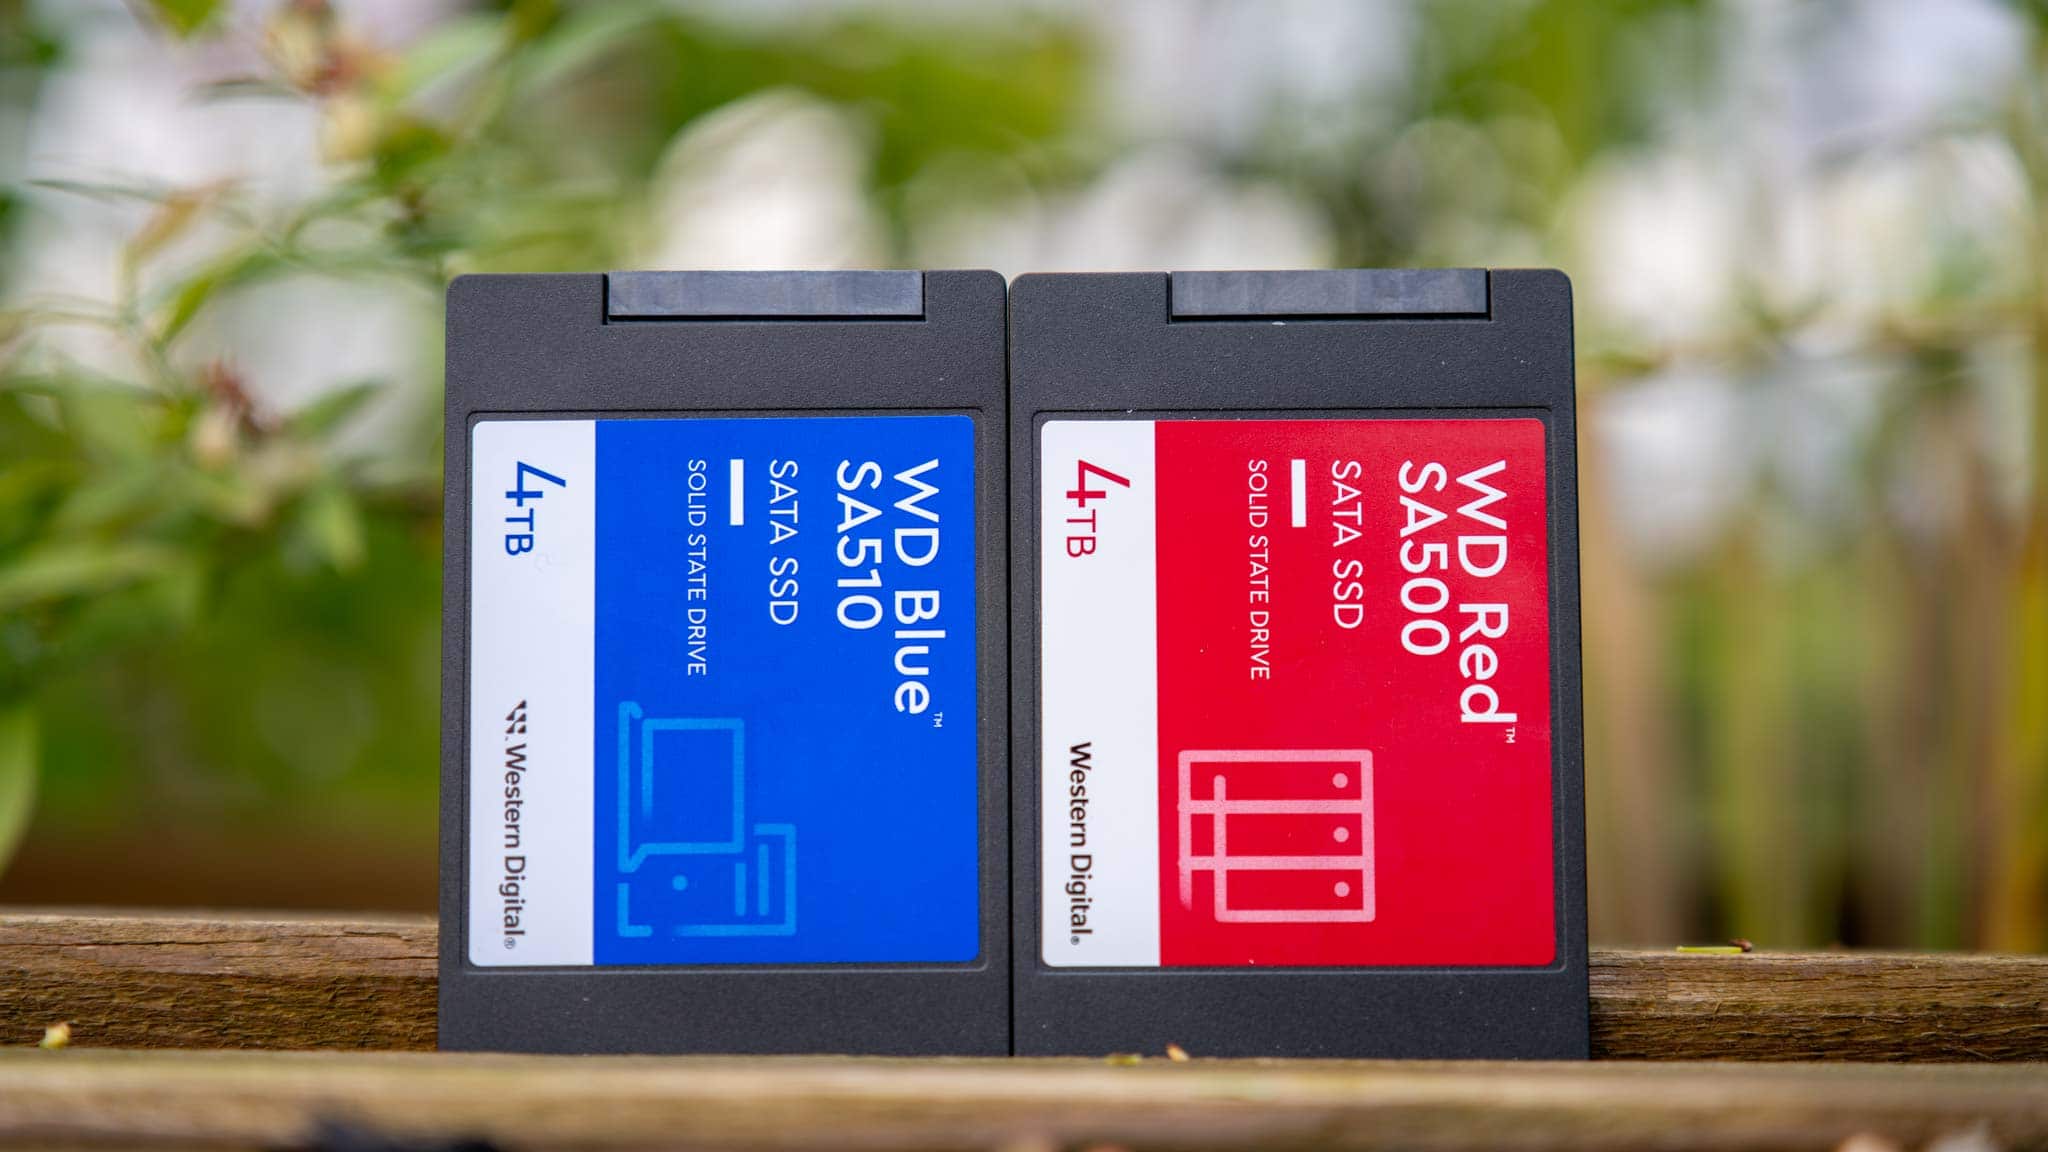 Western Digital WD Blue SA510 and WD Red SA500 SATA SSDs in contrast